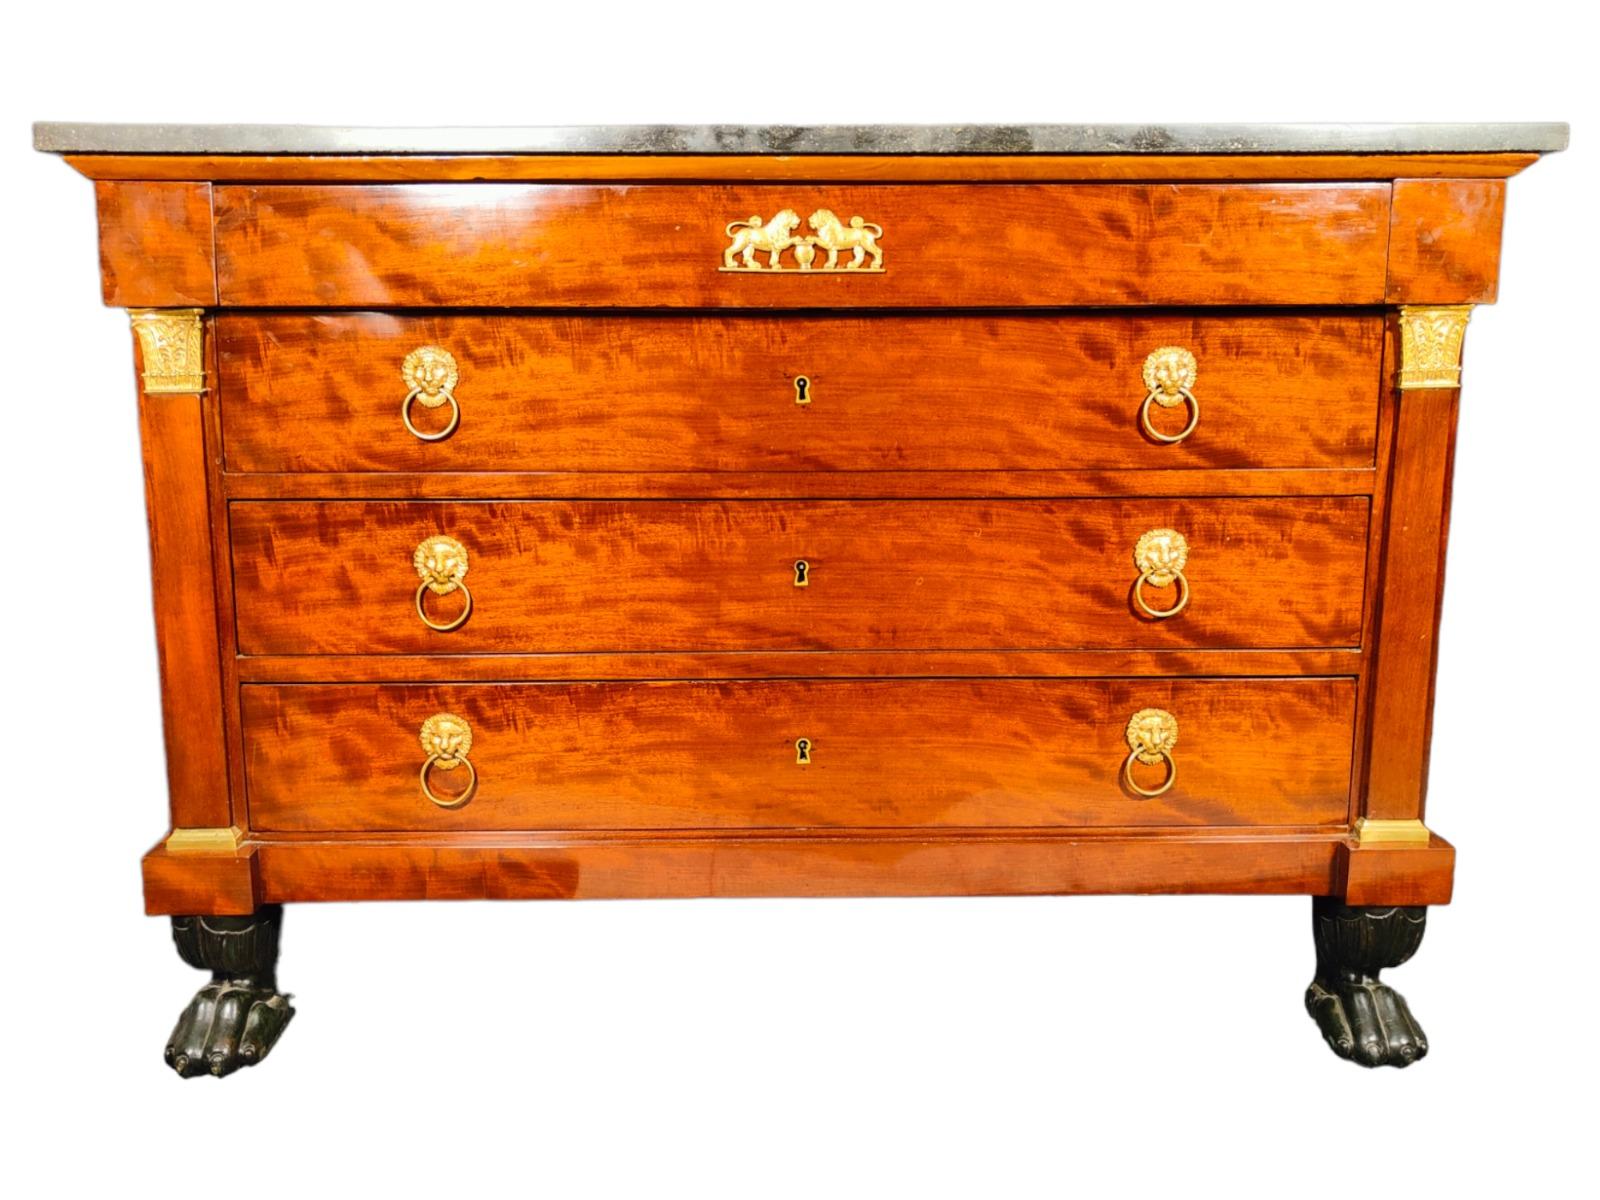  XIX Century Empire Commode
 19th CENTURY EMPIRE CHEST. LARGE FRENCH EMPIRE CHEST IN MAHOGANY AND DECORATED WITH GOLDEN BRONZE.130X59X89 CM